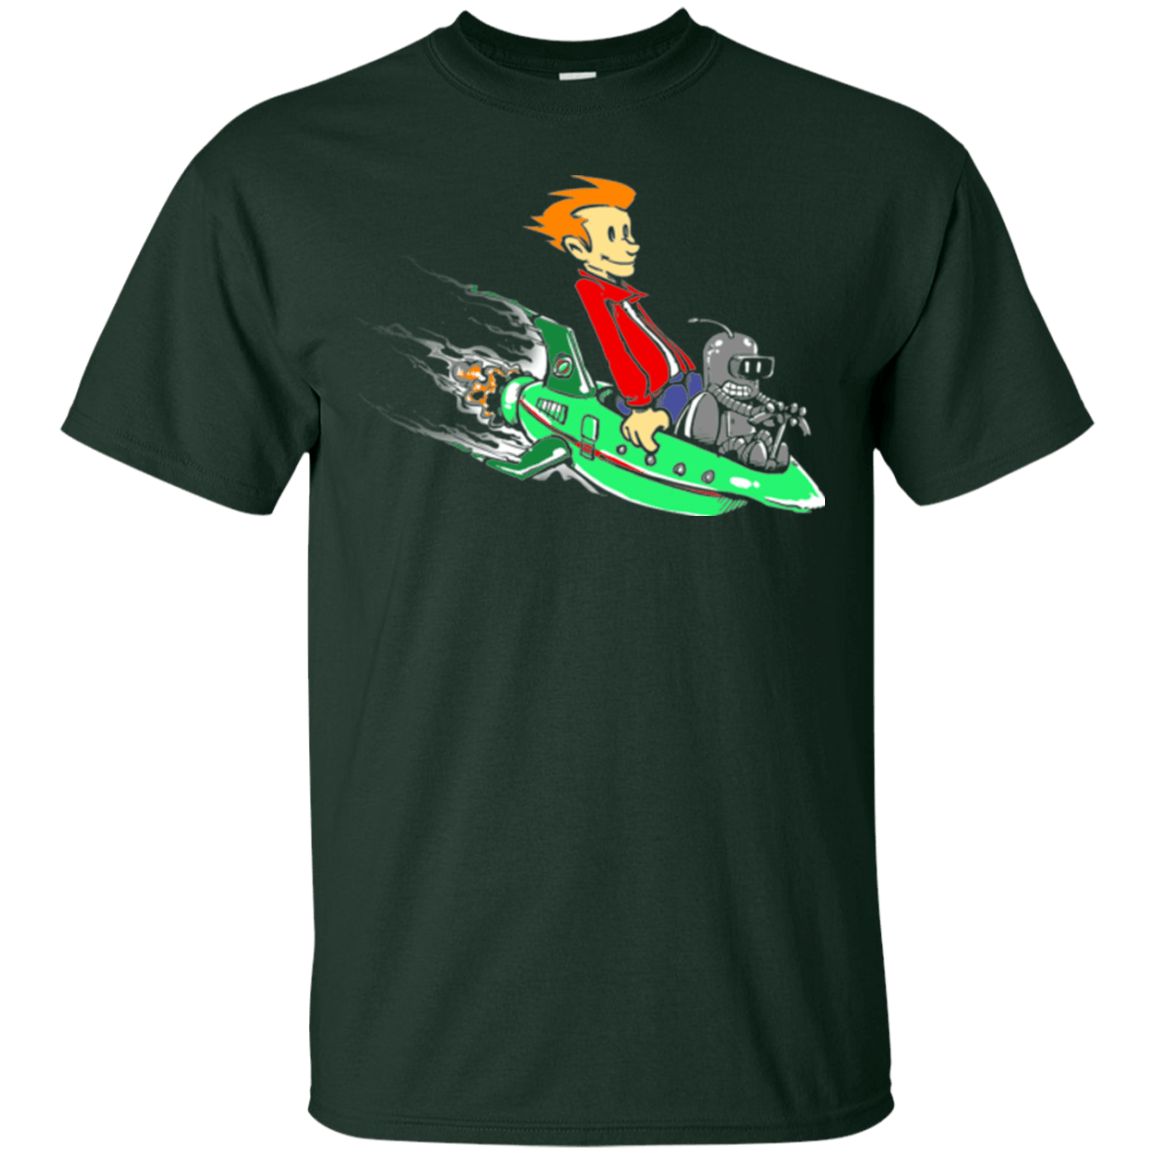 T-Shirts Forest Green / Small Bender and Fry T-Shirt